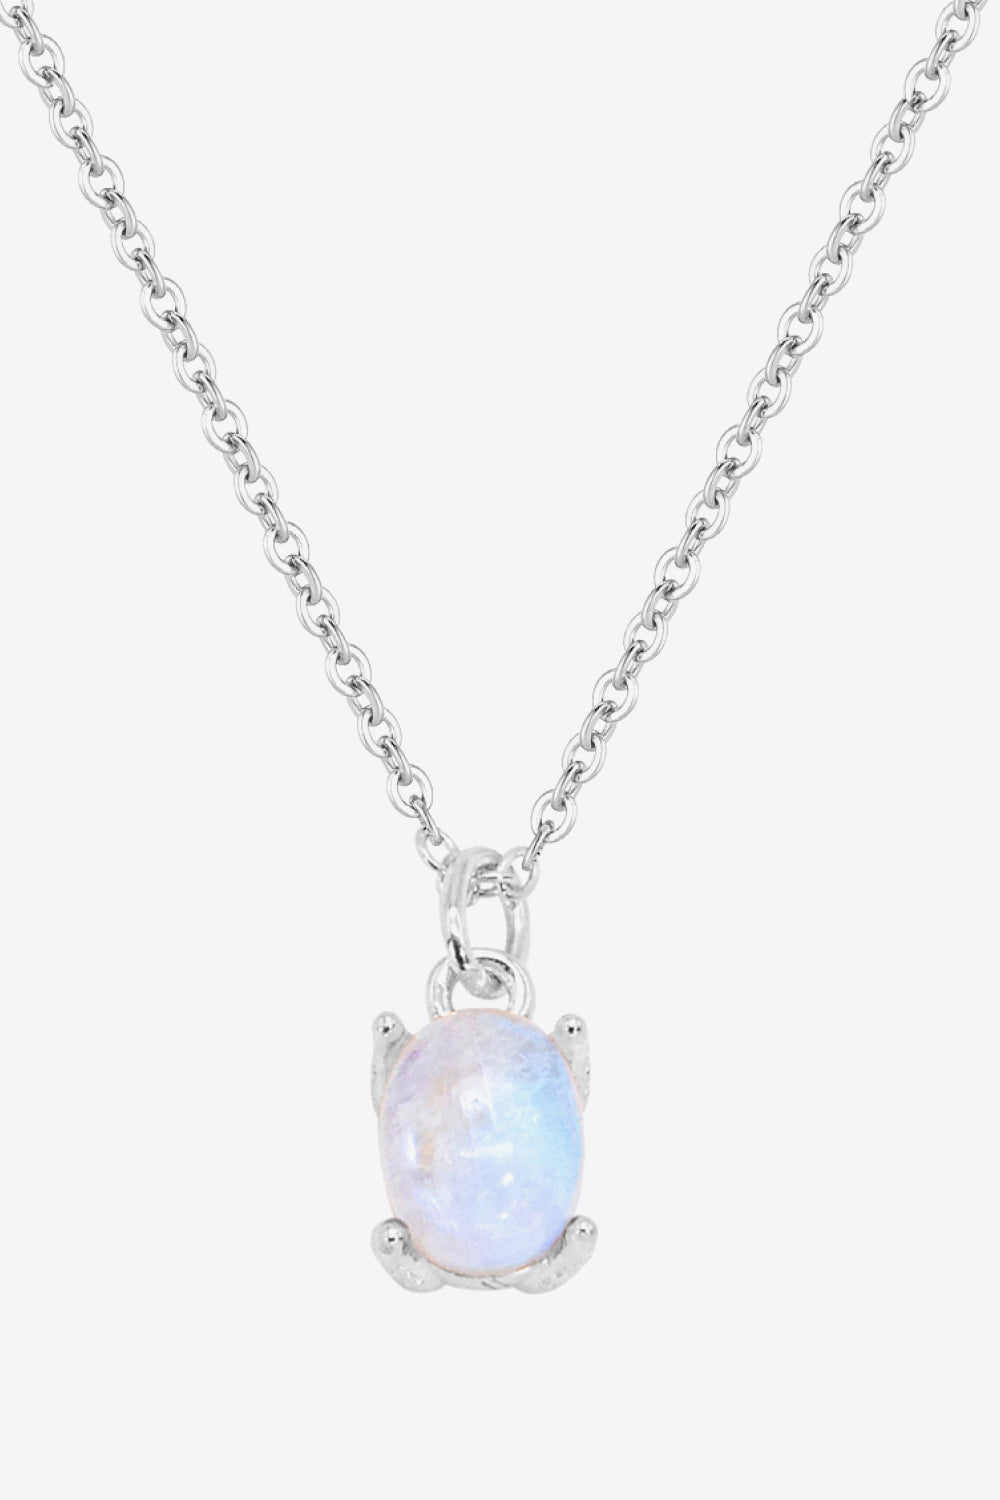 Adorn yourself with celestial elegance with our Silver Moonstone Pendant. Explore the magic of moonstone. Shop now for timeless beauty.